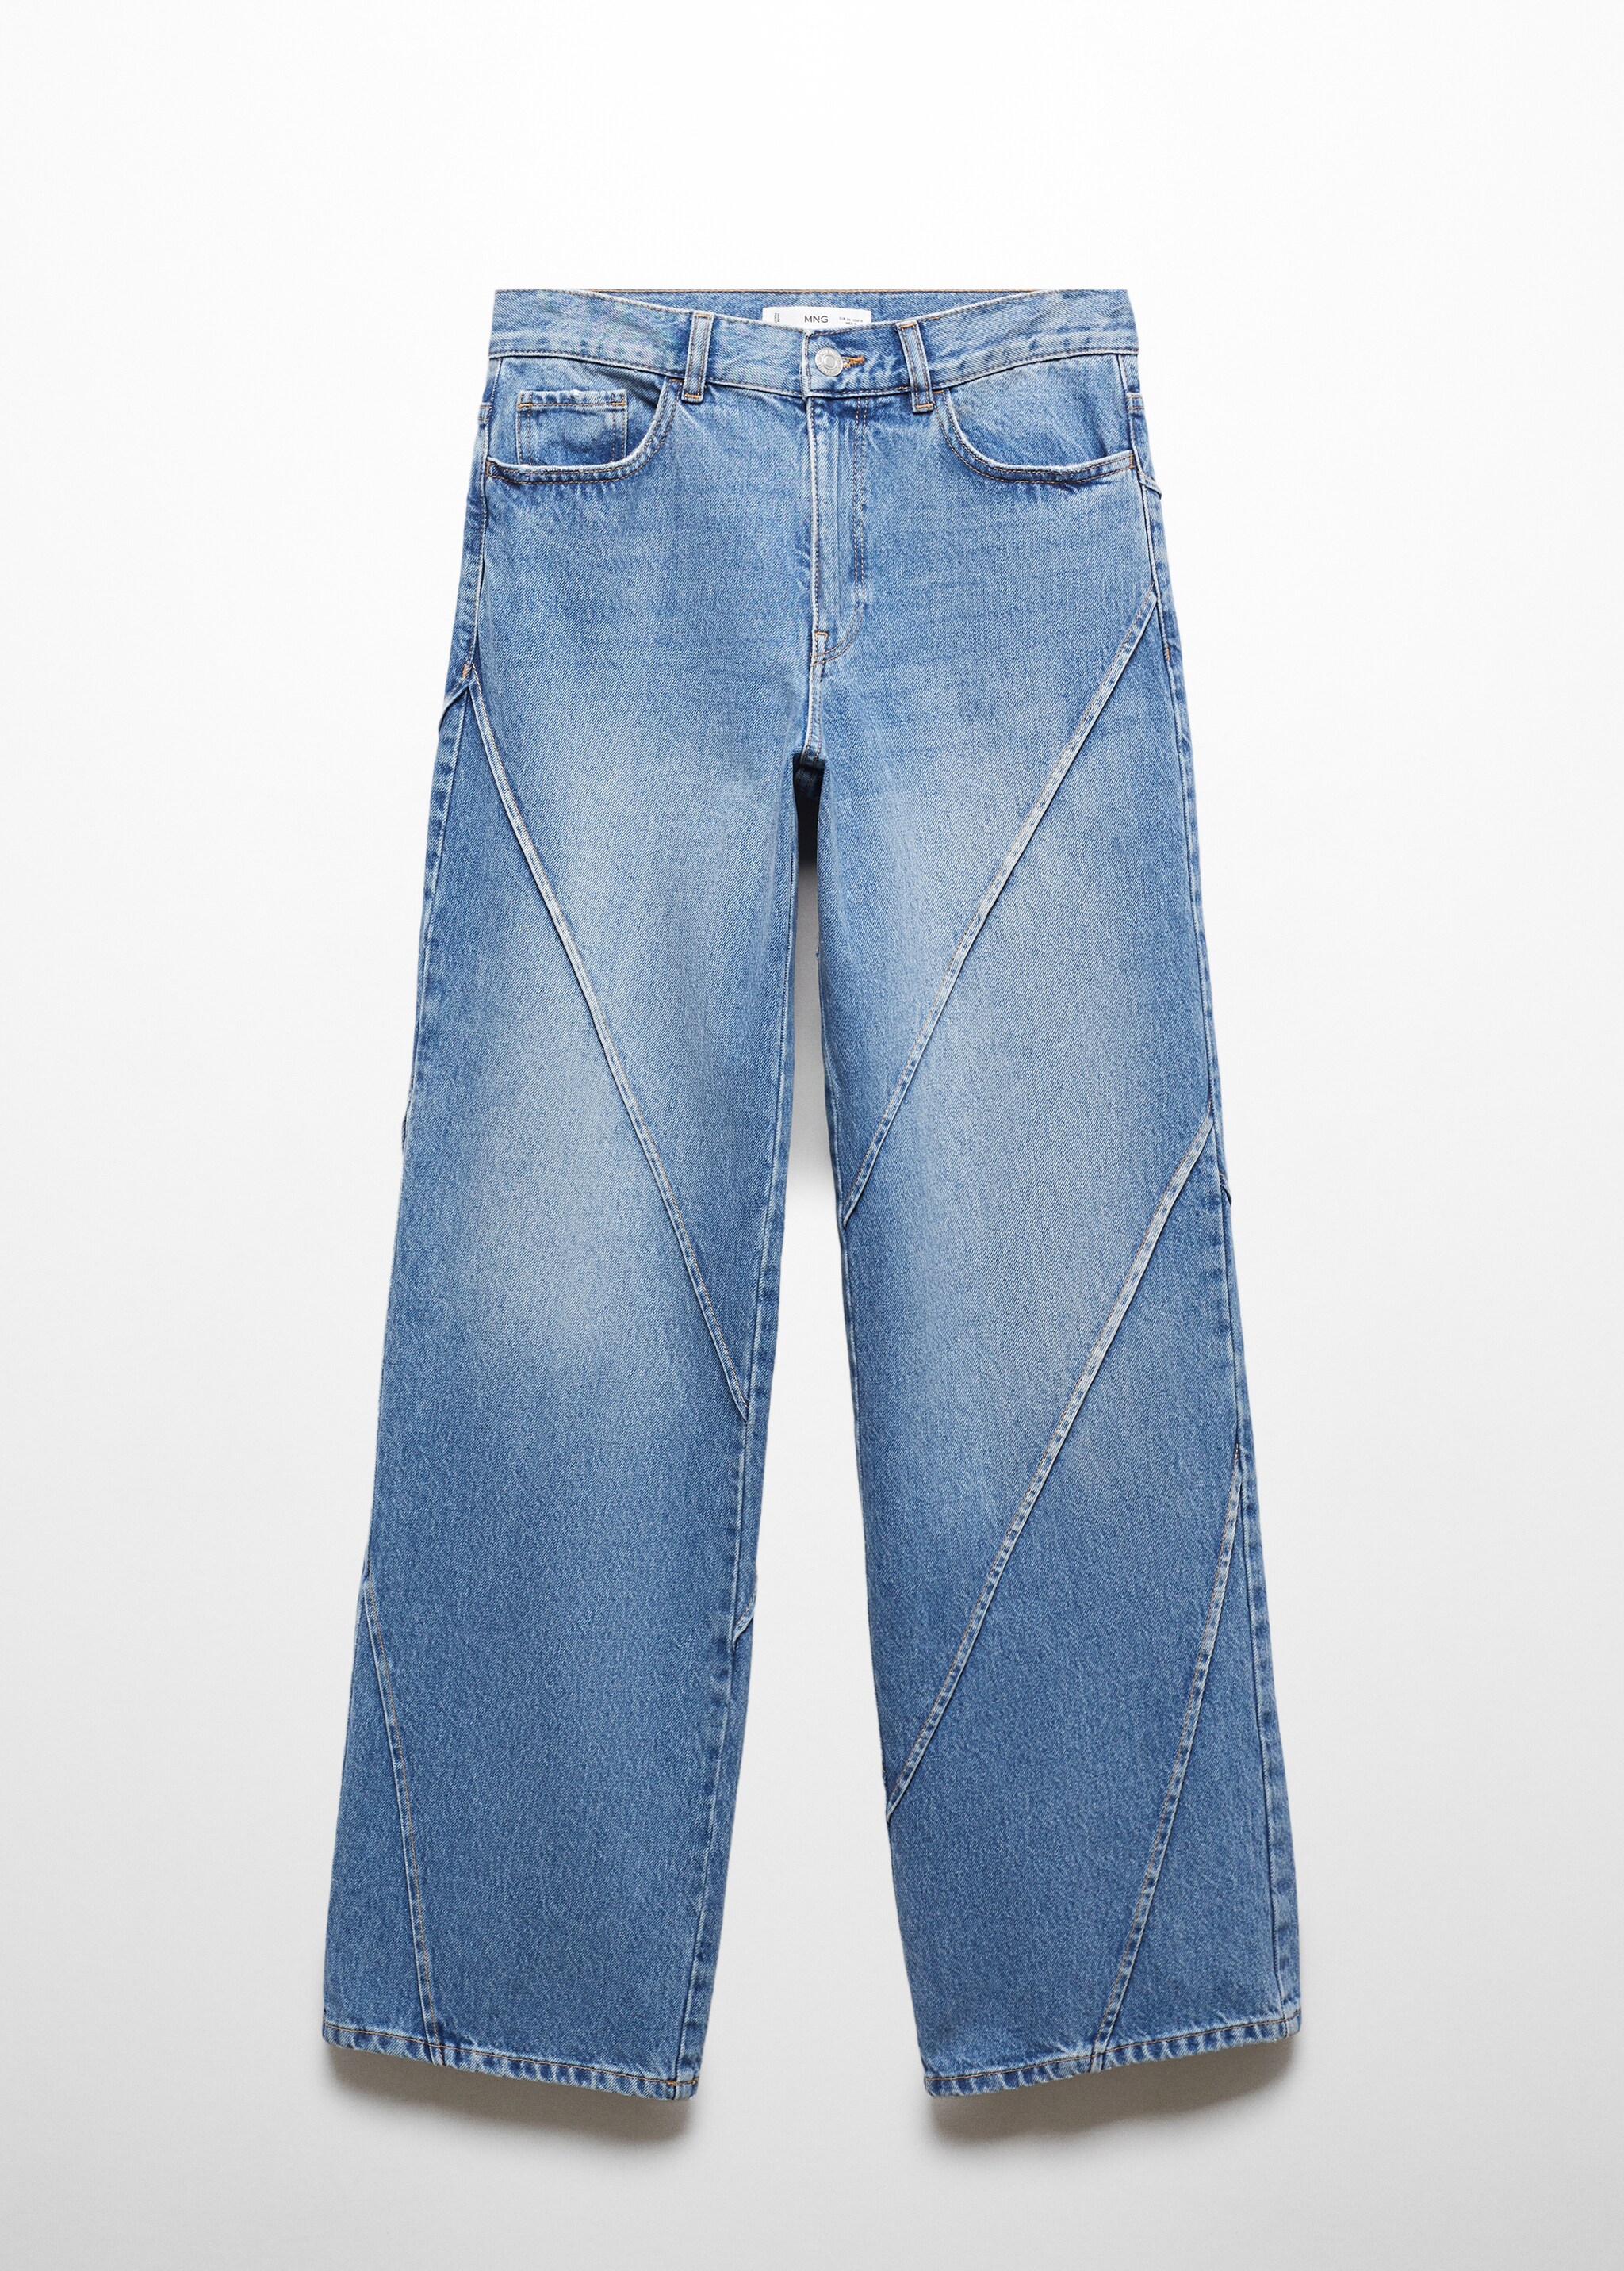 Wideleg jeans with decorative seams - Article without model